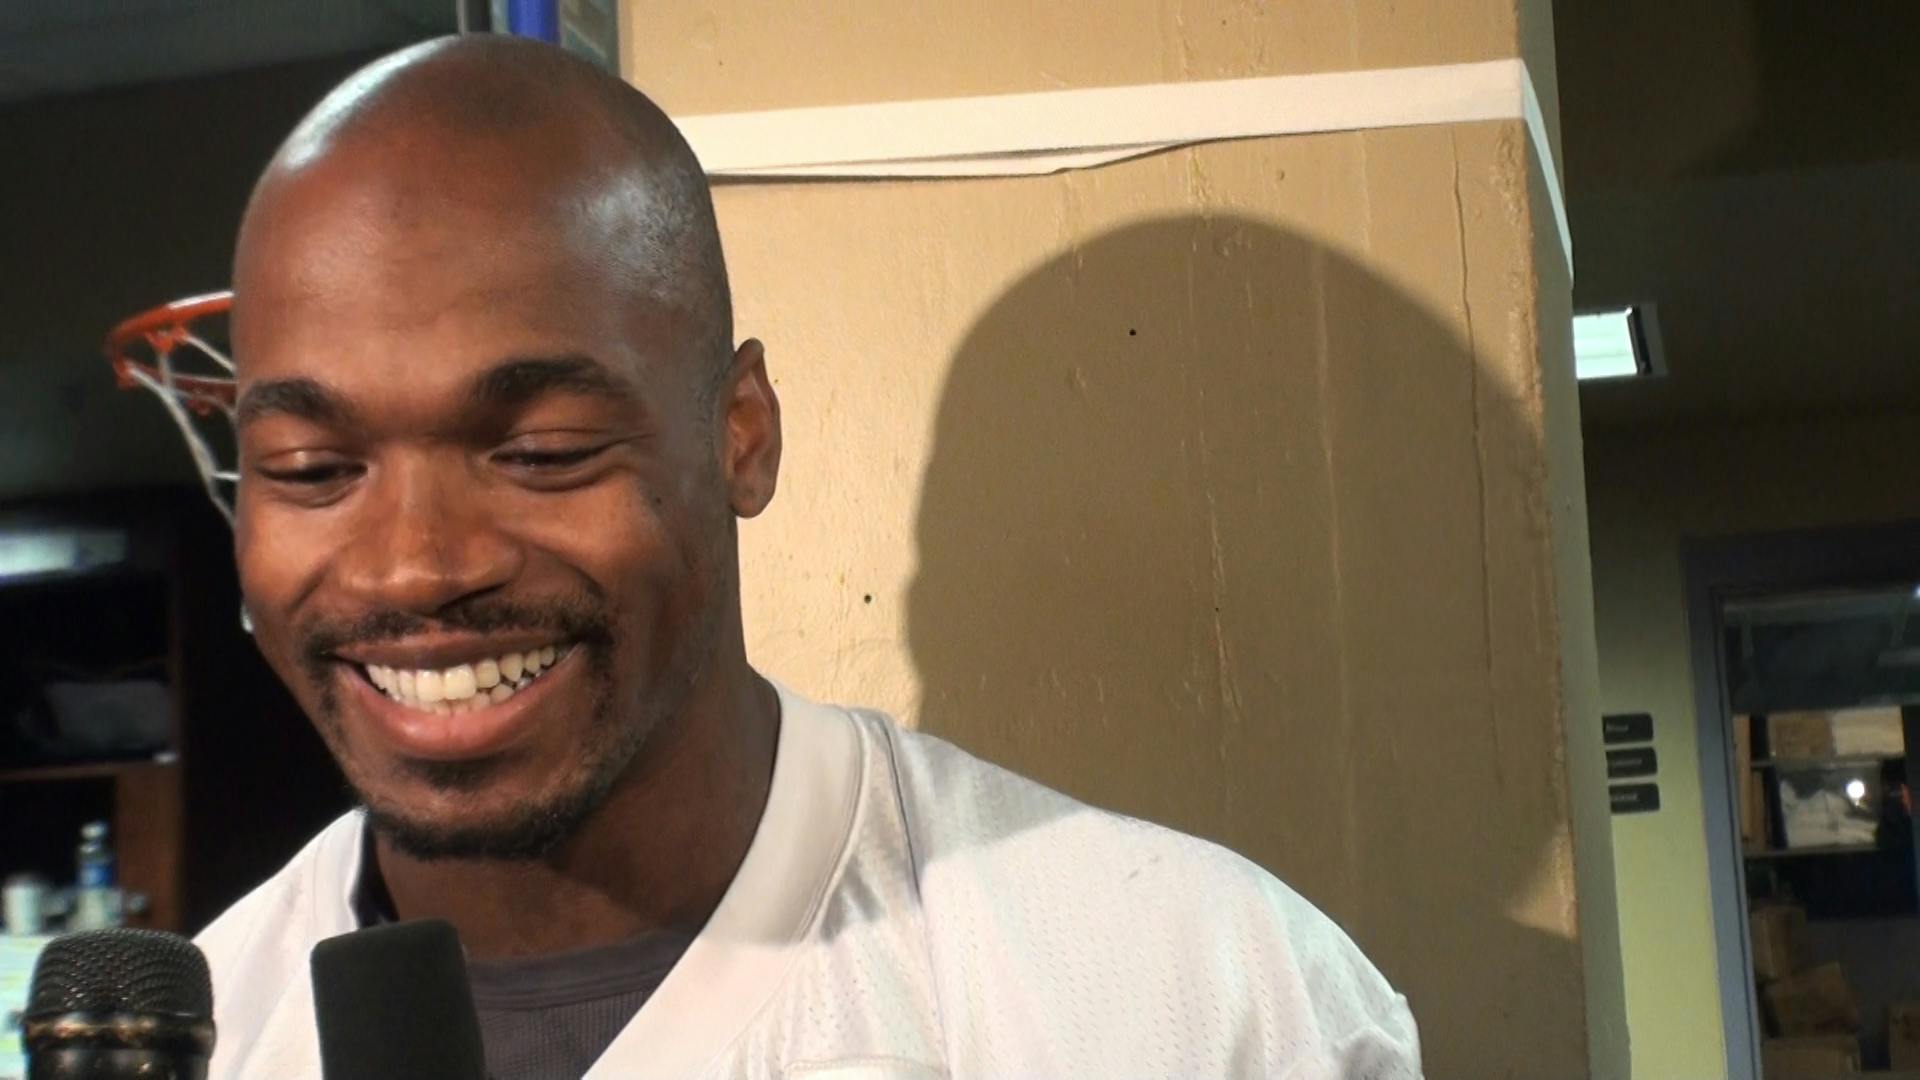 Adrian Peterson says despite what everyone else thinks, he believes the Vikings can end the season with an 8-8 record and make the playoffs.